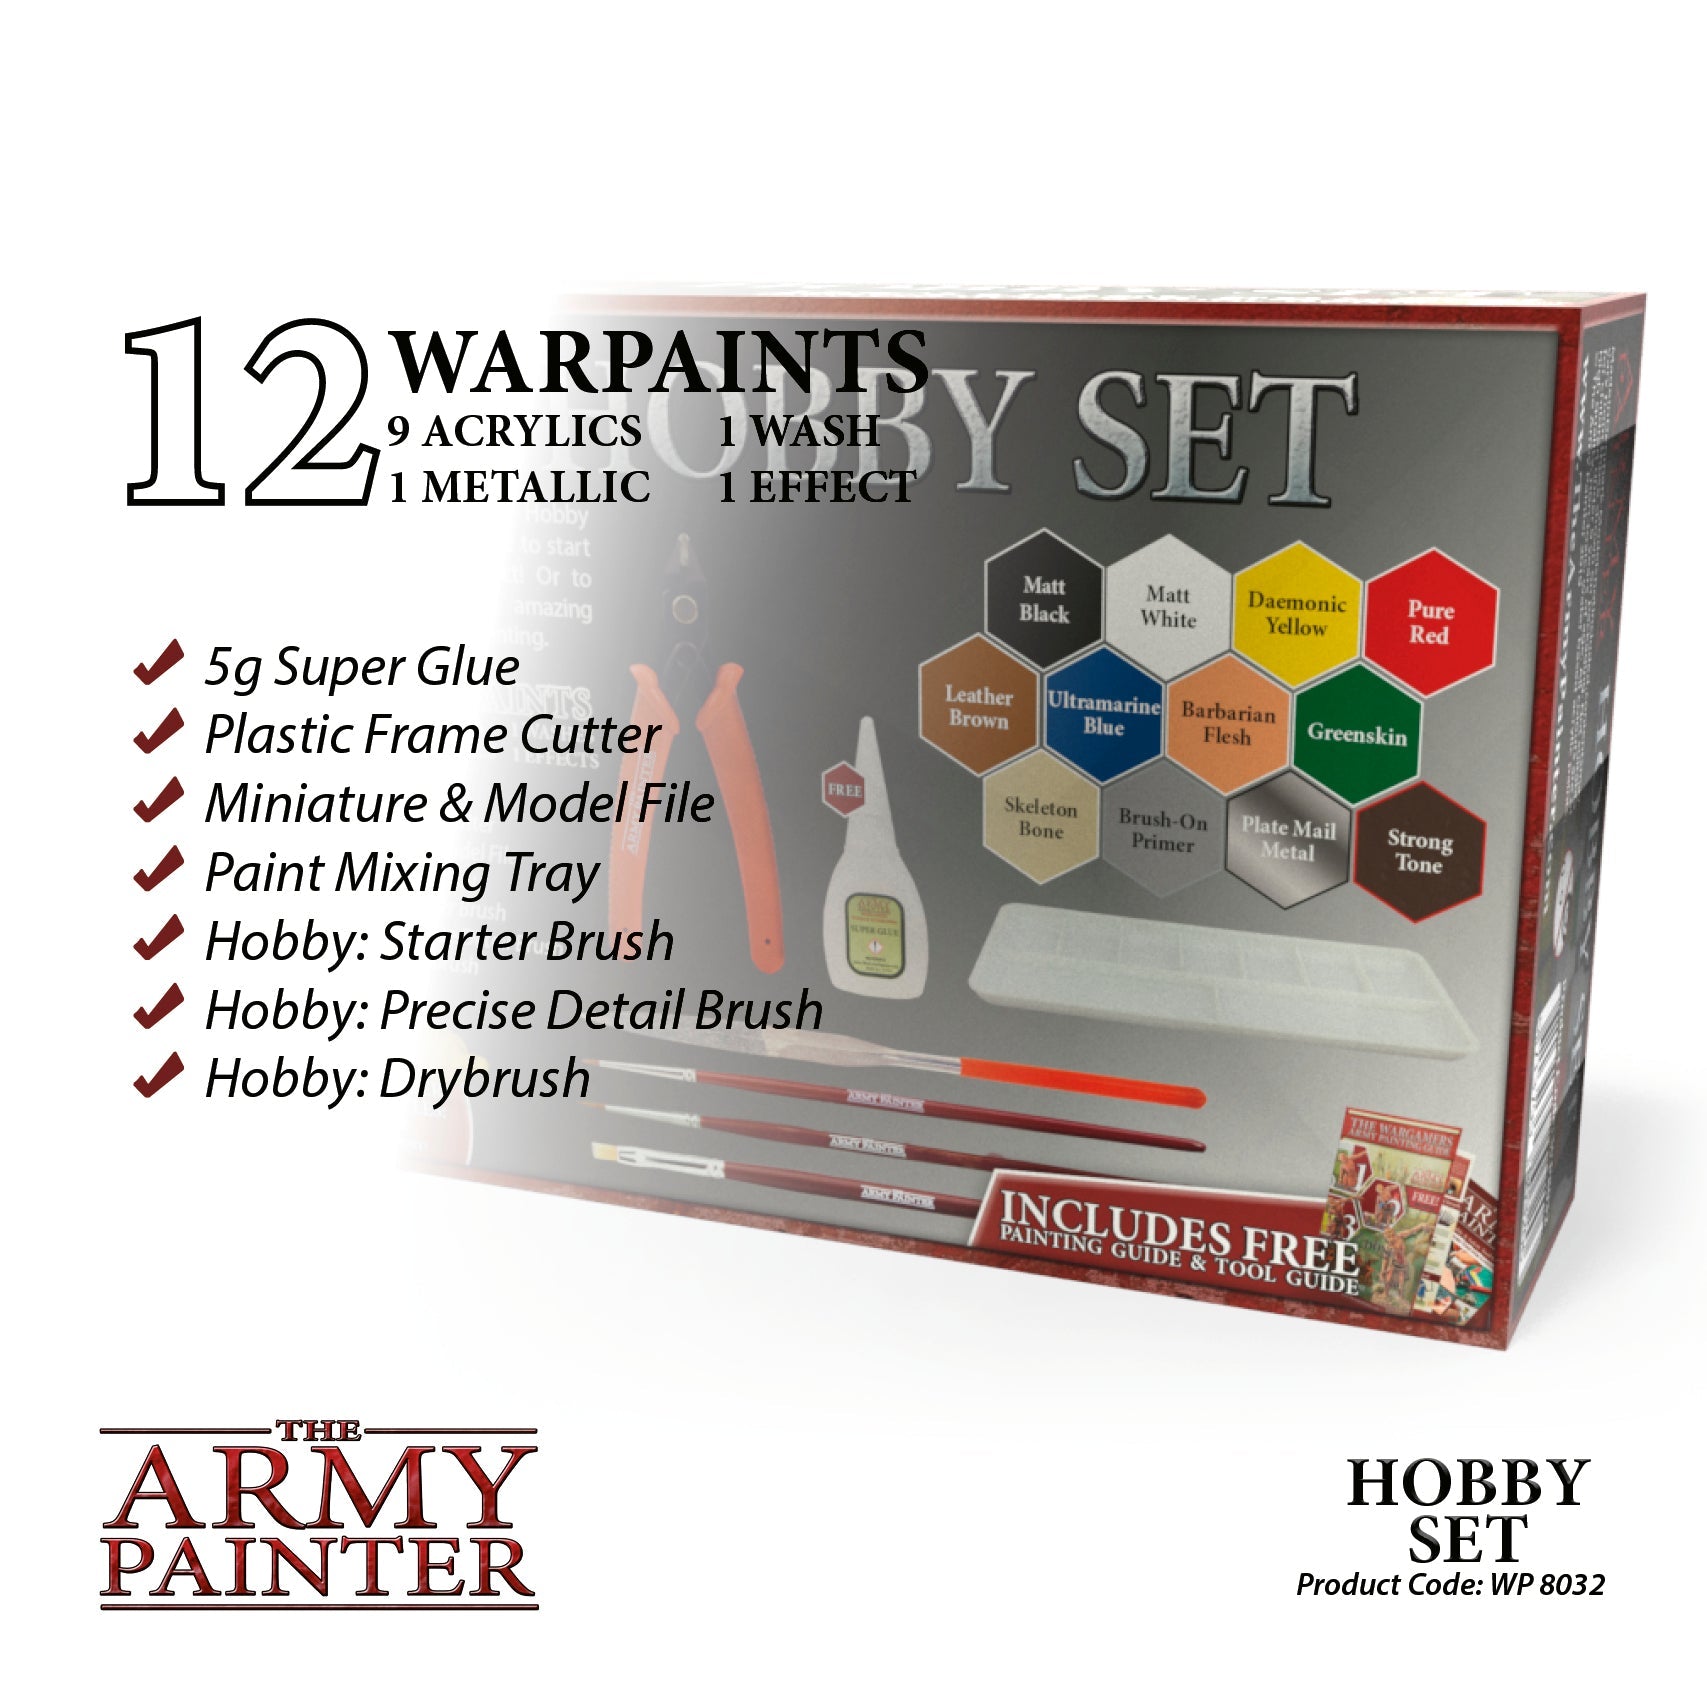 The Army Painter Paint Multi listing 124 Colors Buy 9 get 1 free (10 in  cart)